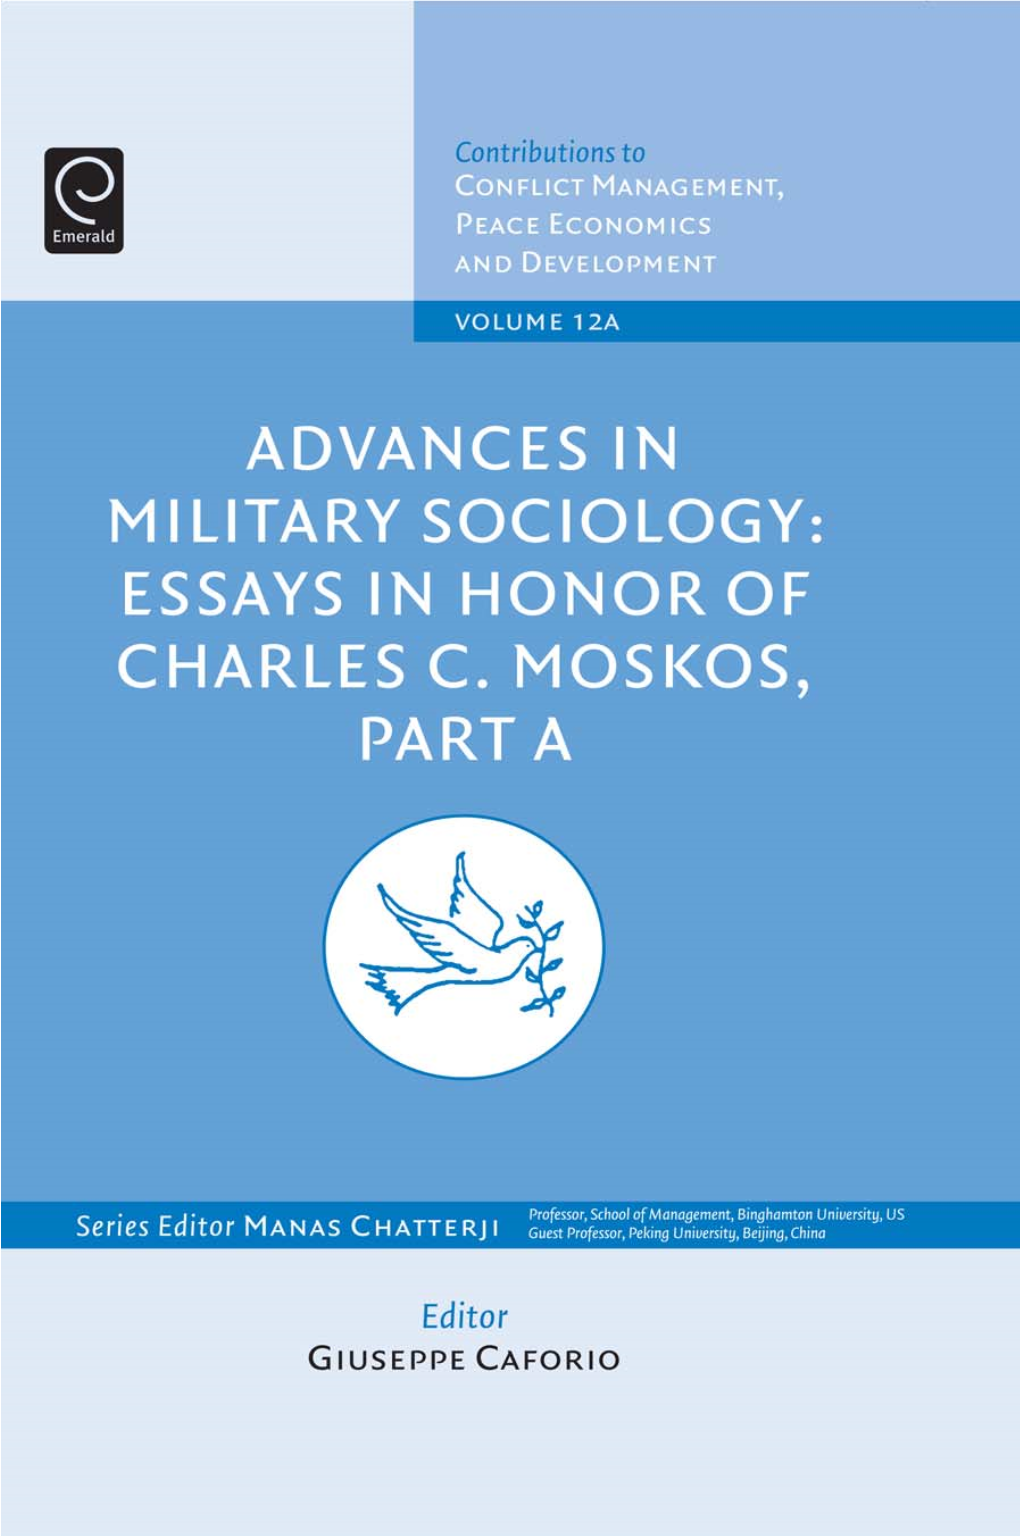 Advances in Military Sociology: Essays in Honour of Charles C. Moskos, Part A